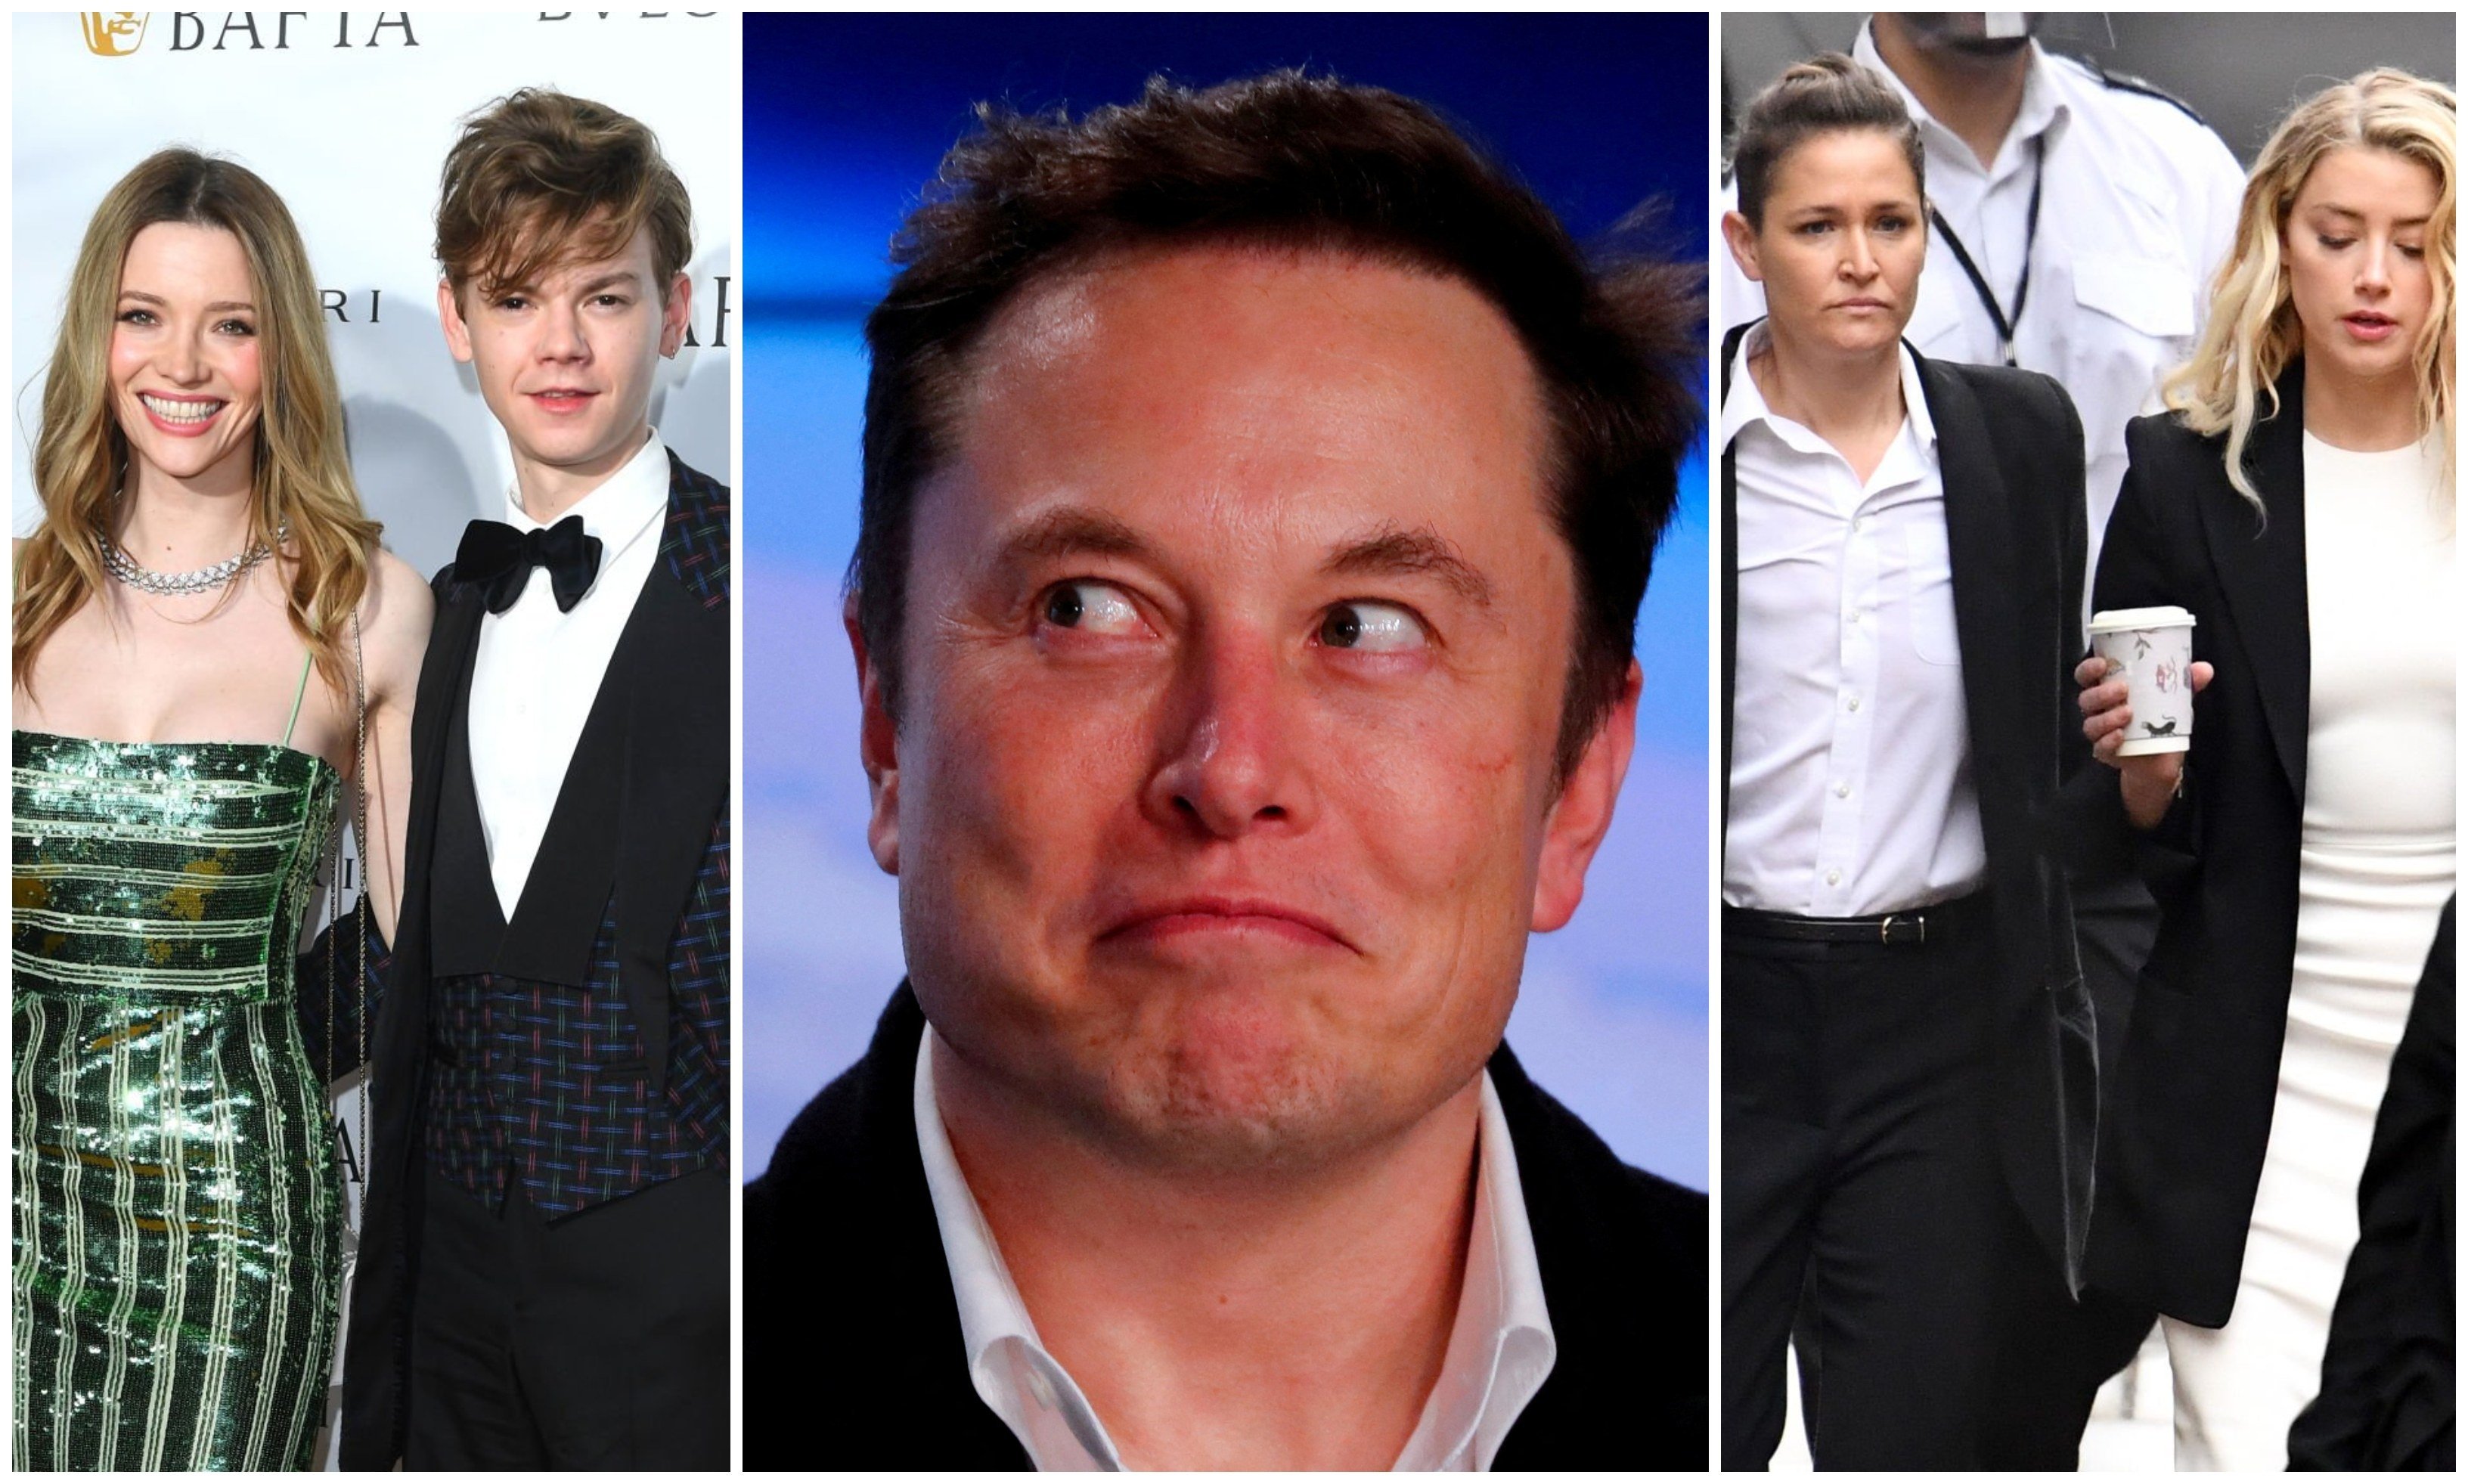 Elon Musk’s exes have moved on with unexpected romances: Talulah Riley is now dating Love Actually star Thomas Brodie-Sangster, while Amber Heard saw Bianca Butti for two years. Photos: Reuters, Getty